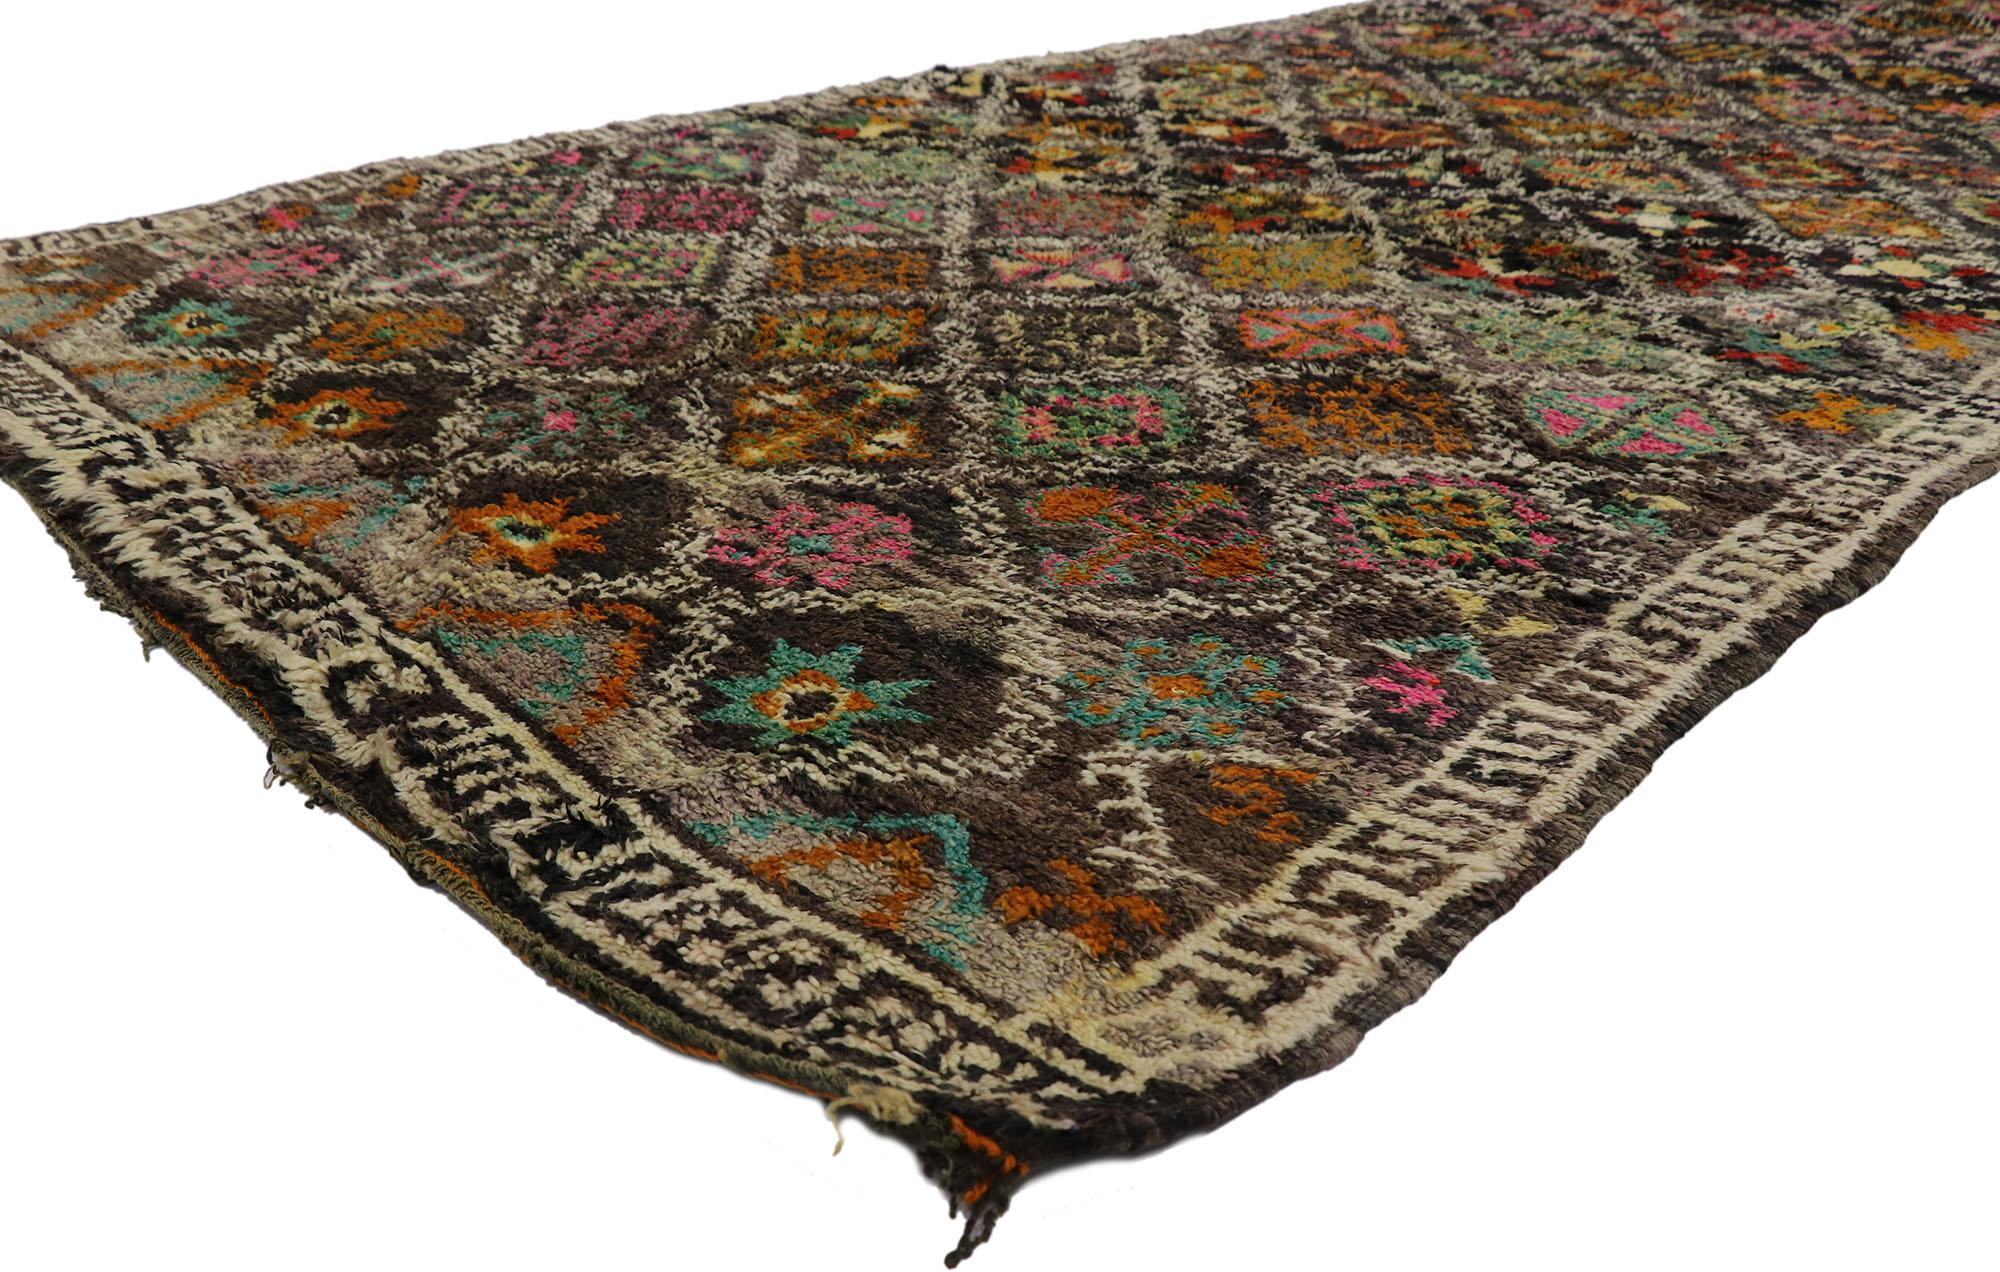 21282 Vintage Berber Boujad Moroccan rug with Tribal Boho Chic style. Measures: 06'01 x 12'11. Showcasing a bold expressive design, incredible detail and texture, this hand knotted wool vintage Berber Boujad Moroccan rug is a captivating vision of